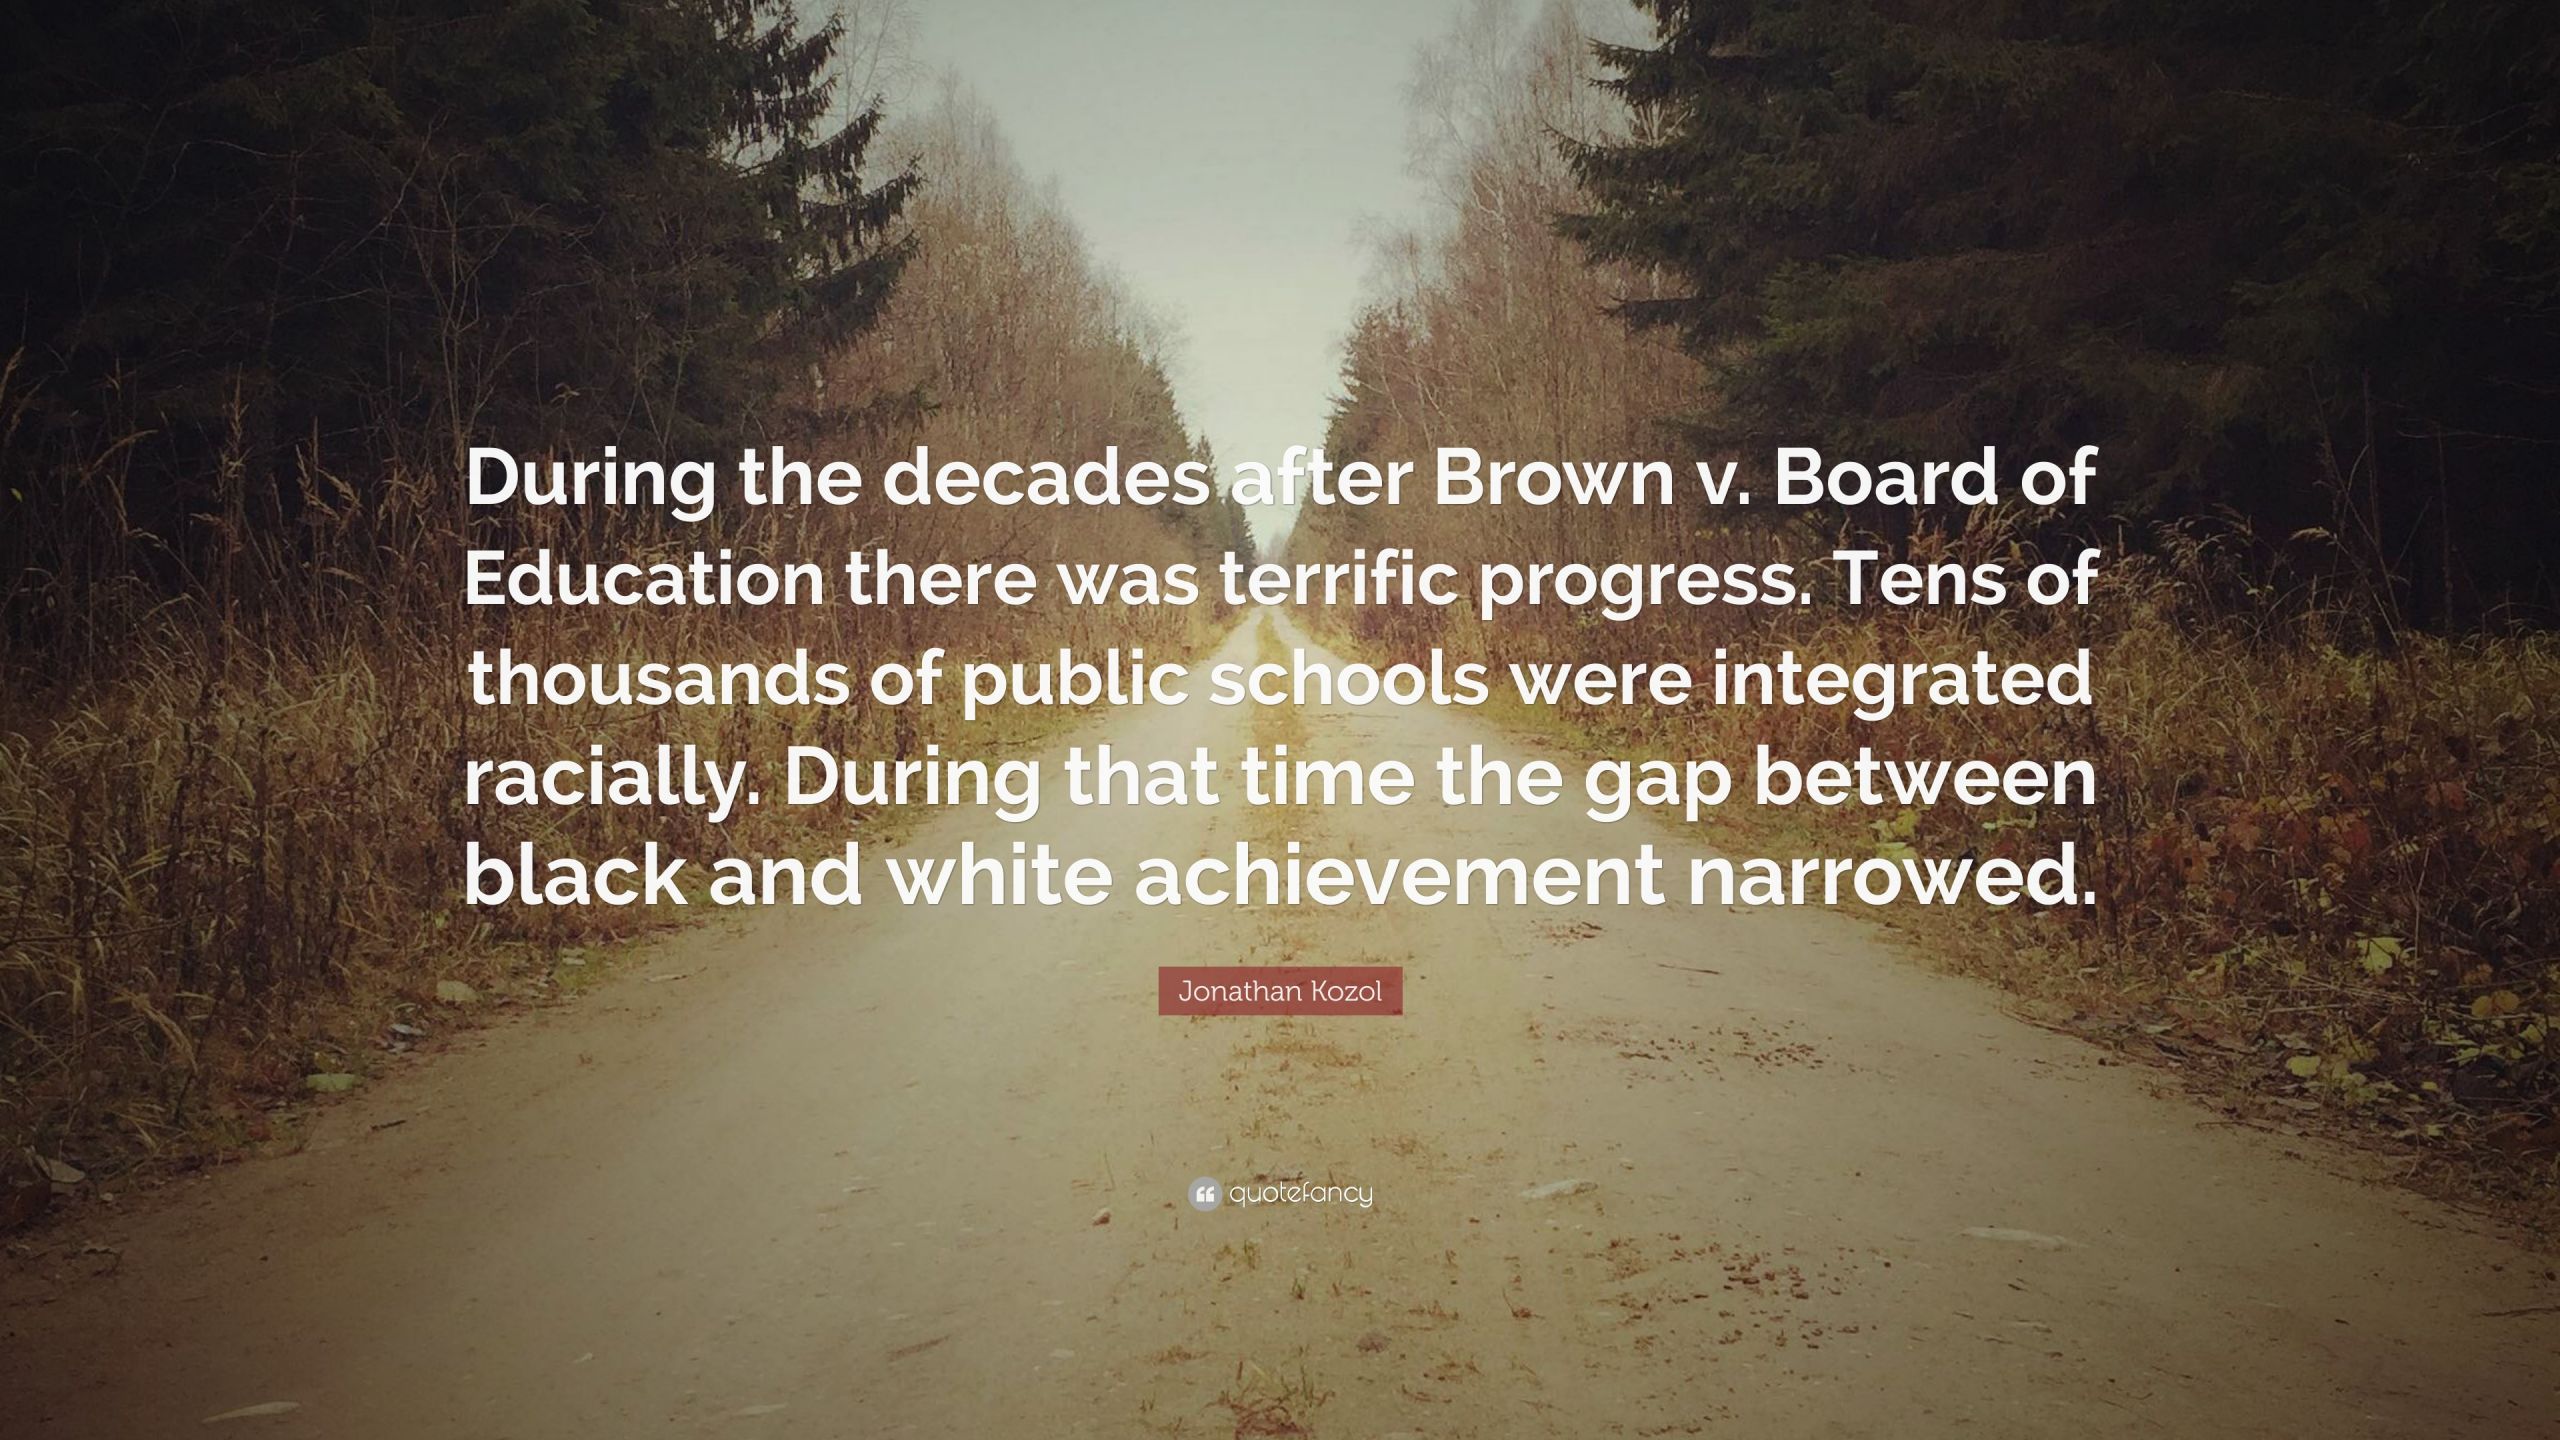 Brown Vs Board Of Education Quotes
 Jonathan Kozol Quote “During the decades after Brown v